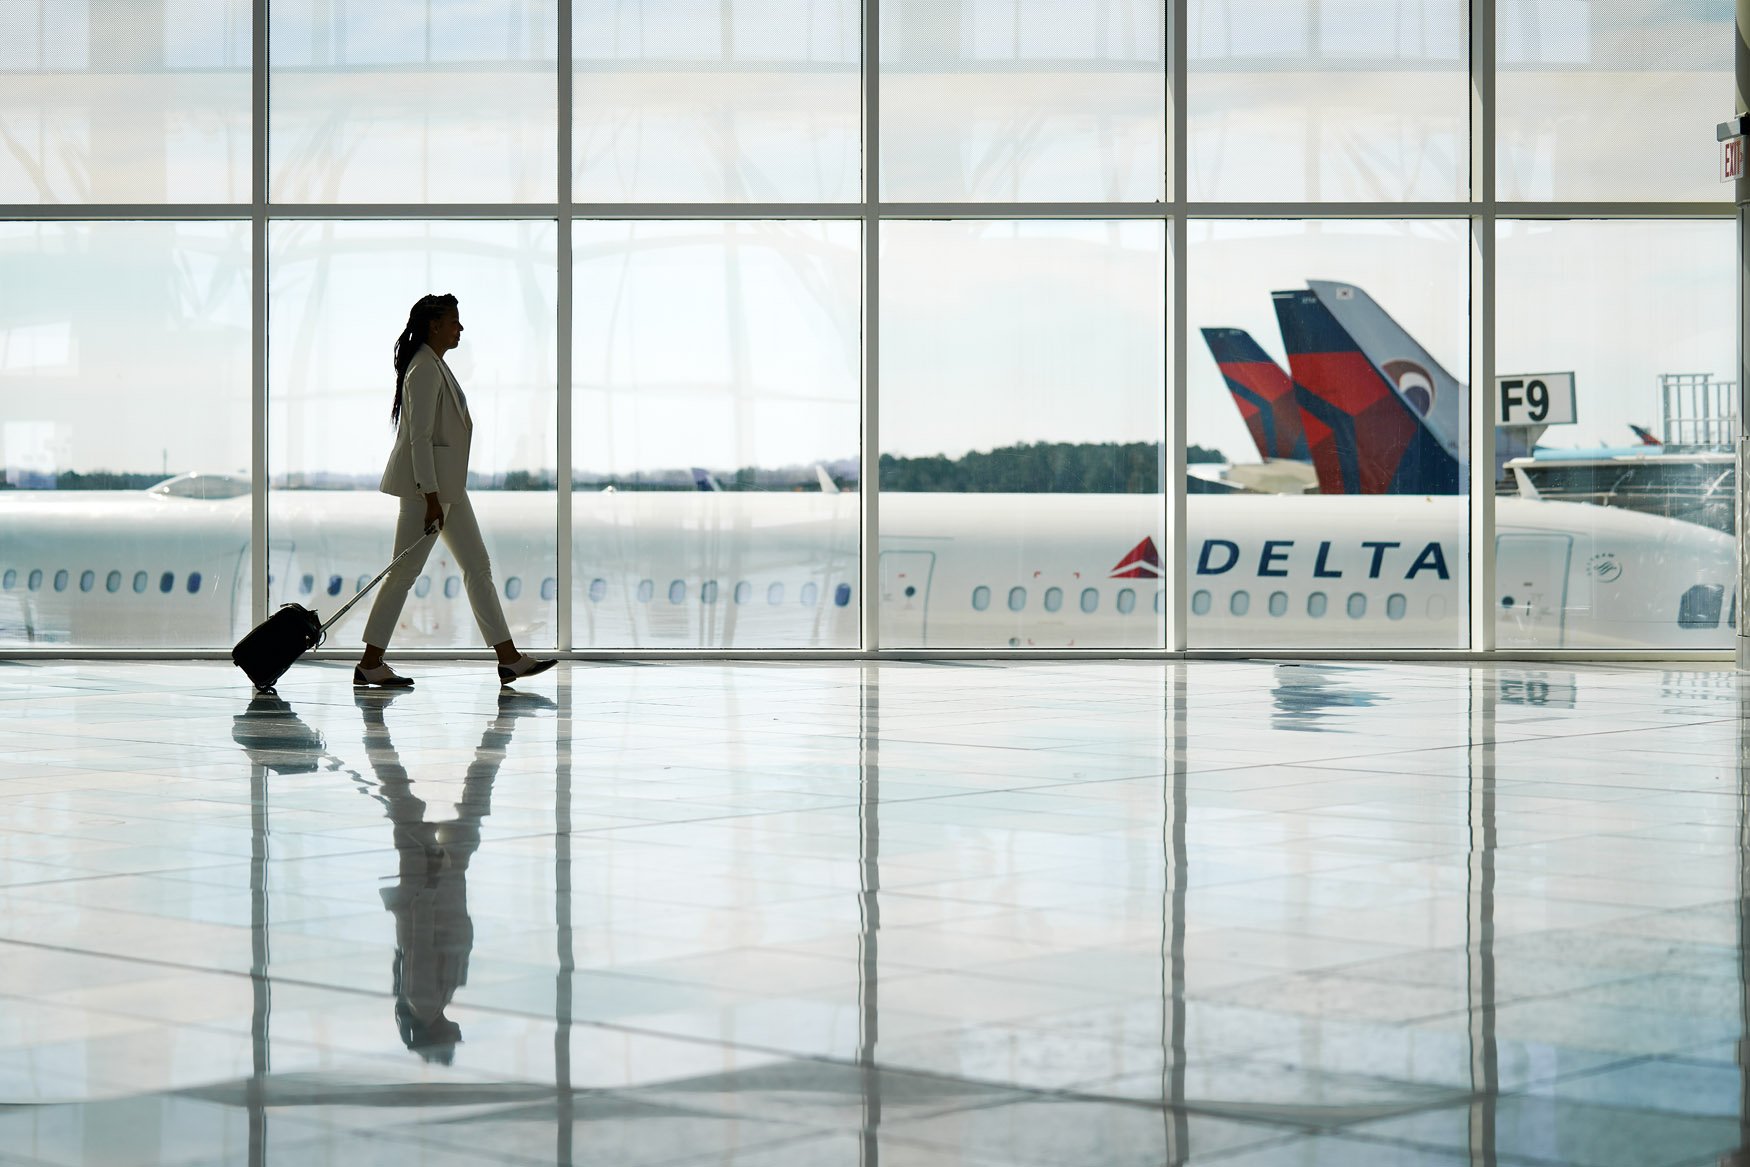 Get to Know Delta FlyReady